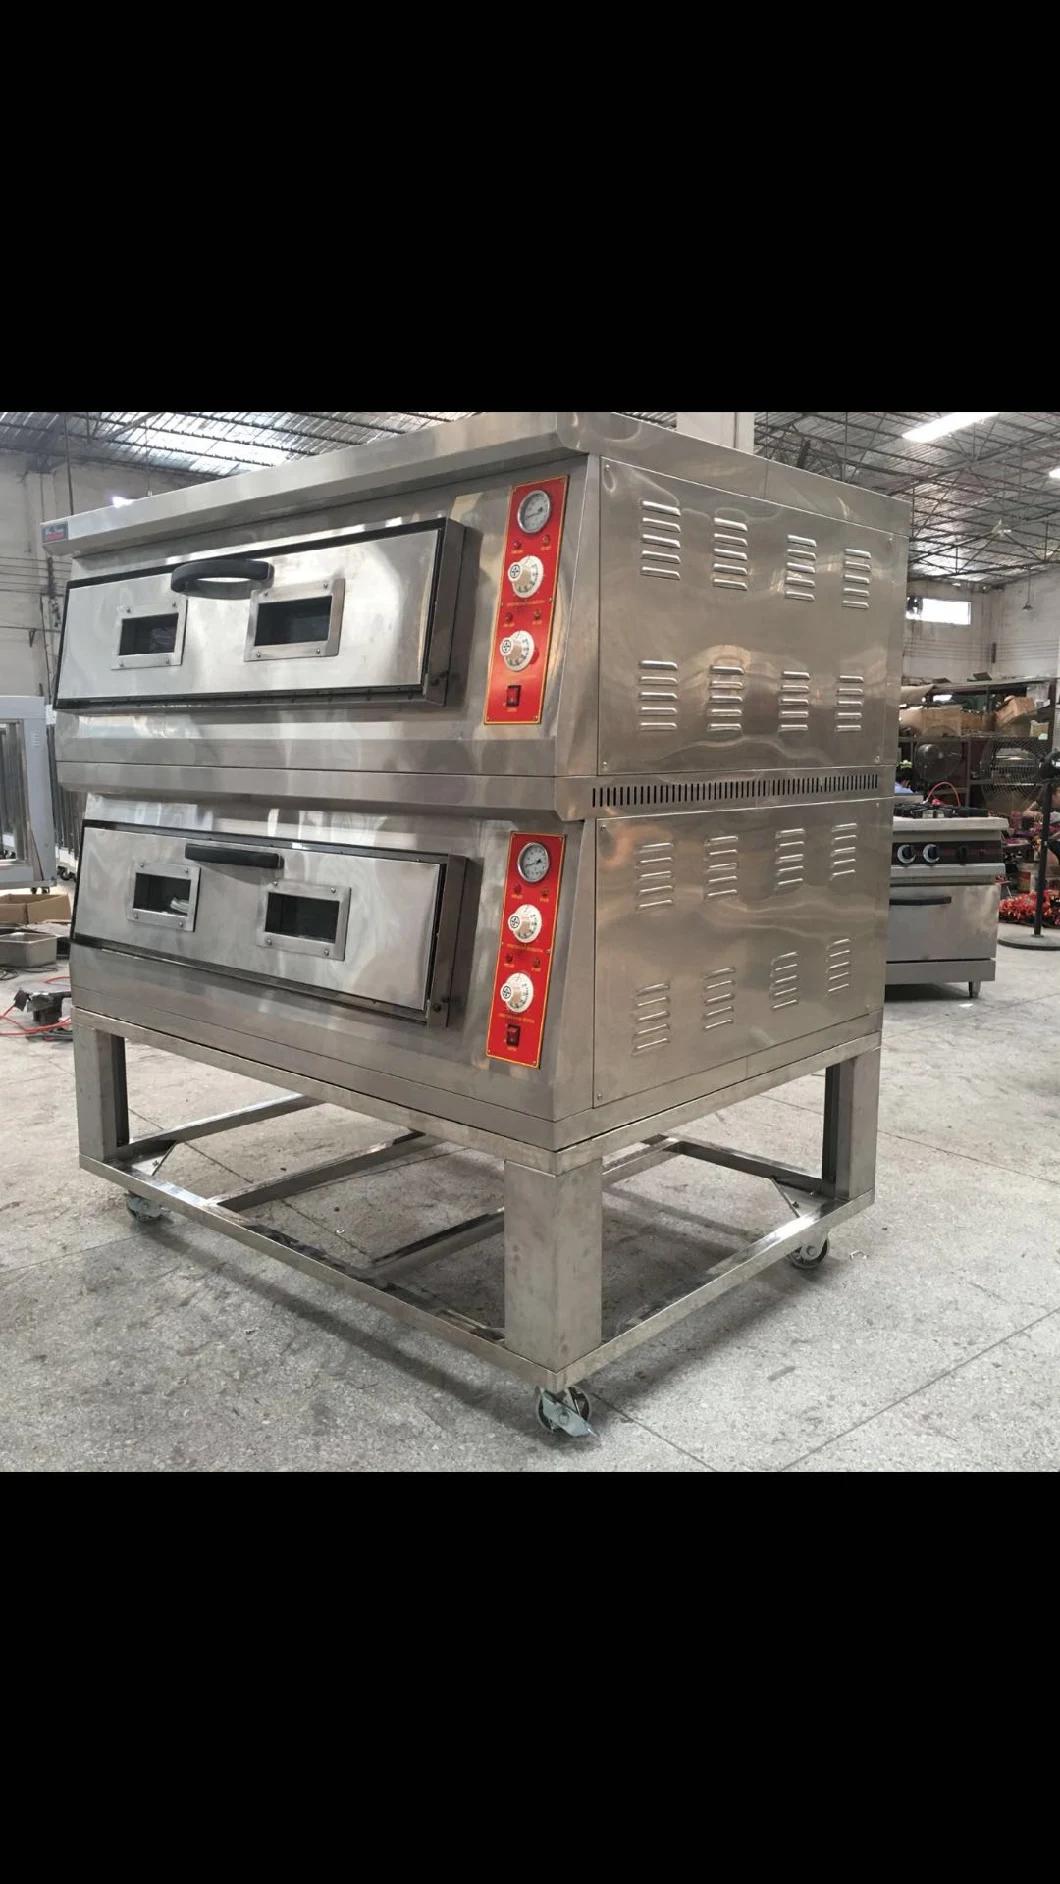 Stainless Steel High Quality Commerical Gas Bread Pizza Oven Big Chamble with Stone